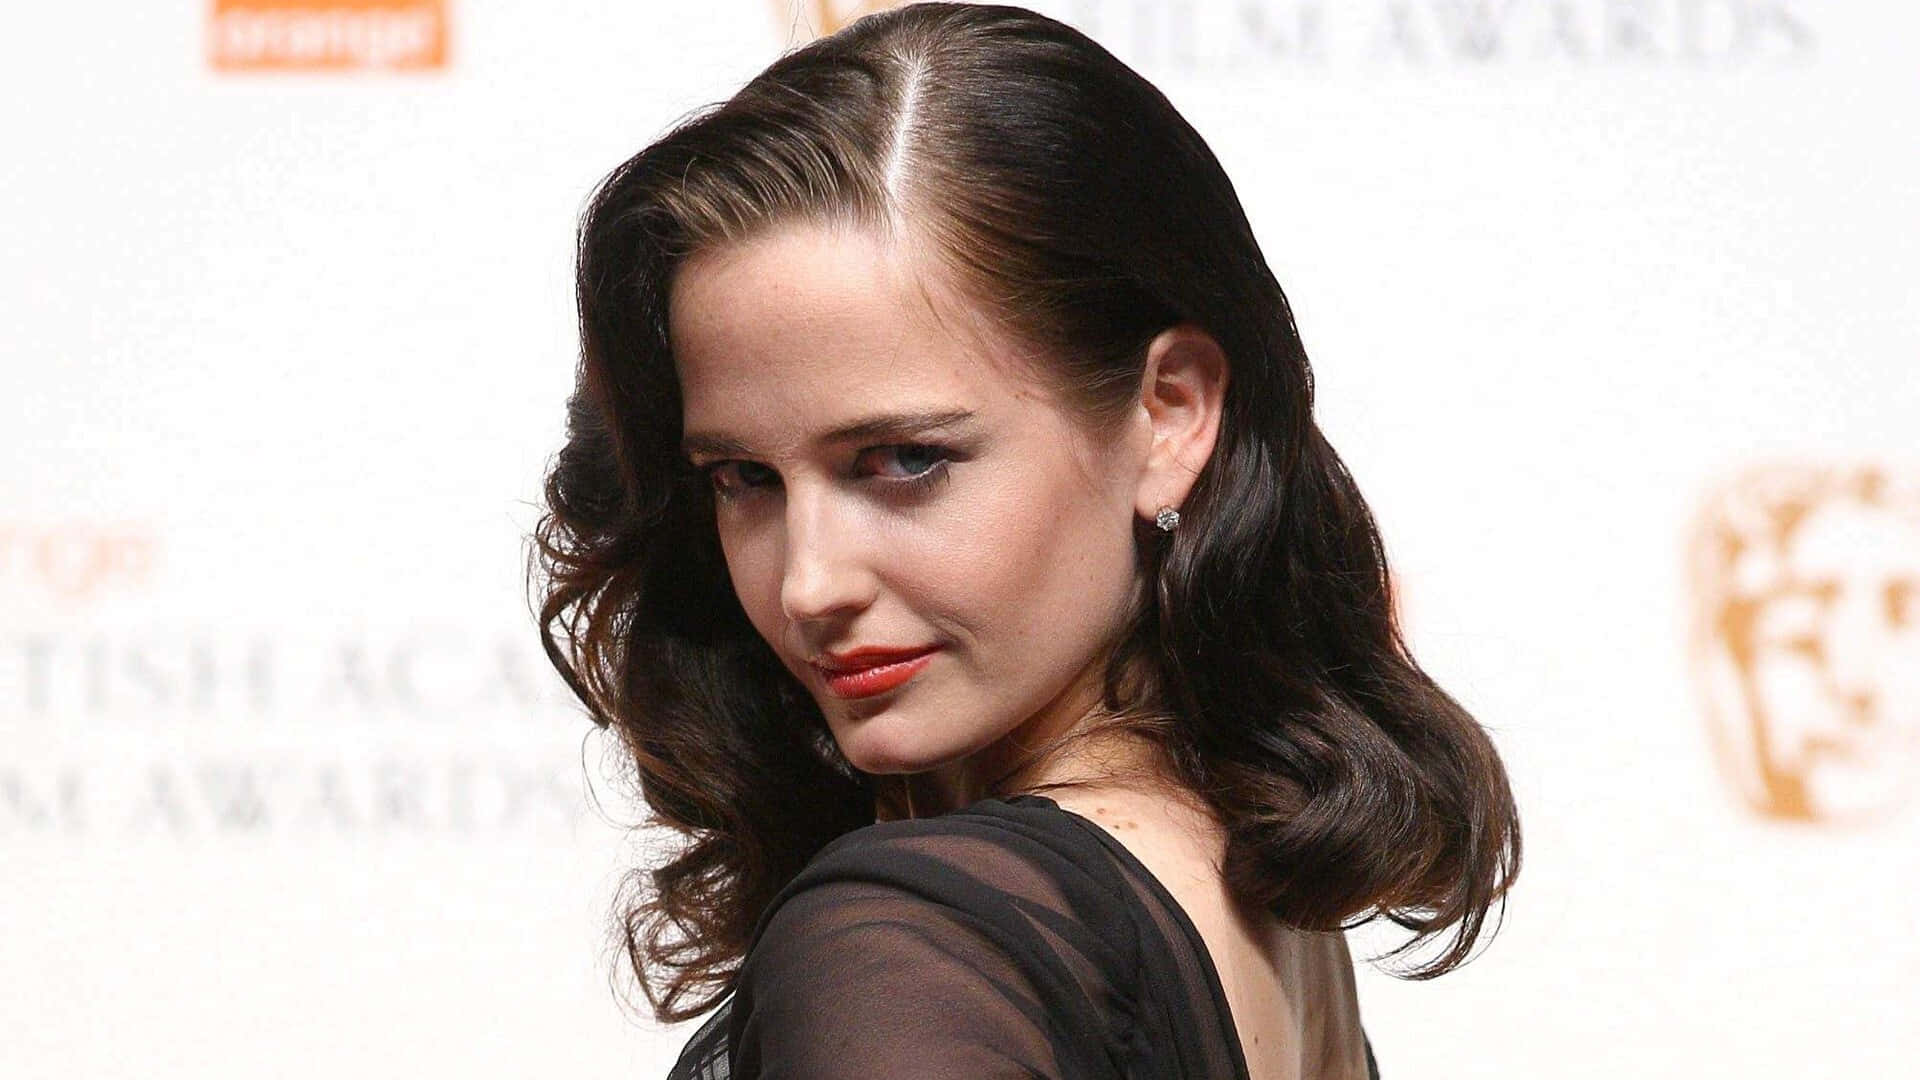 Eva Green Posing Elegantly in a Chic Outfit Wallpaper